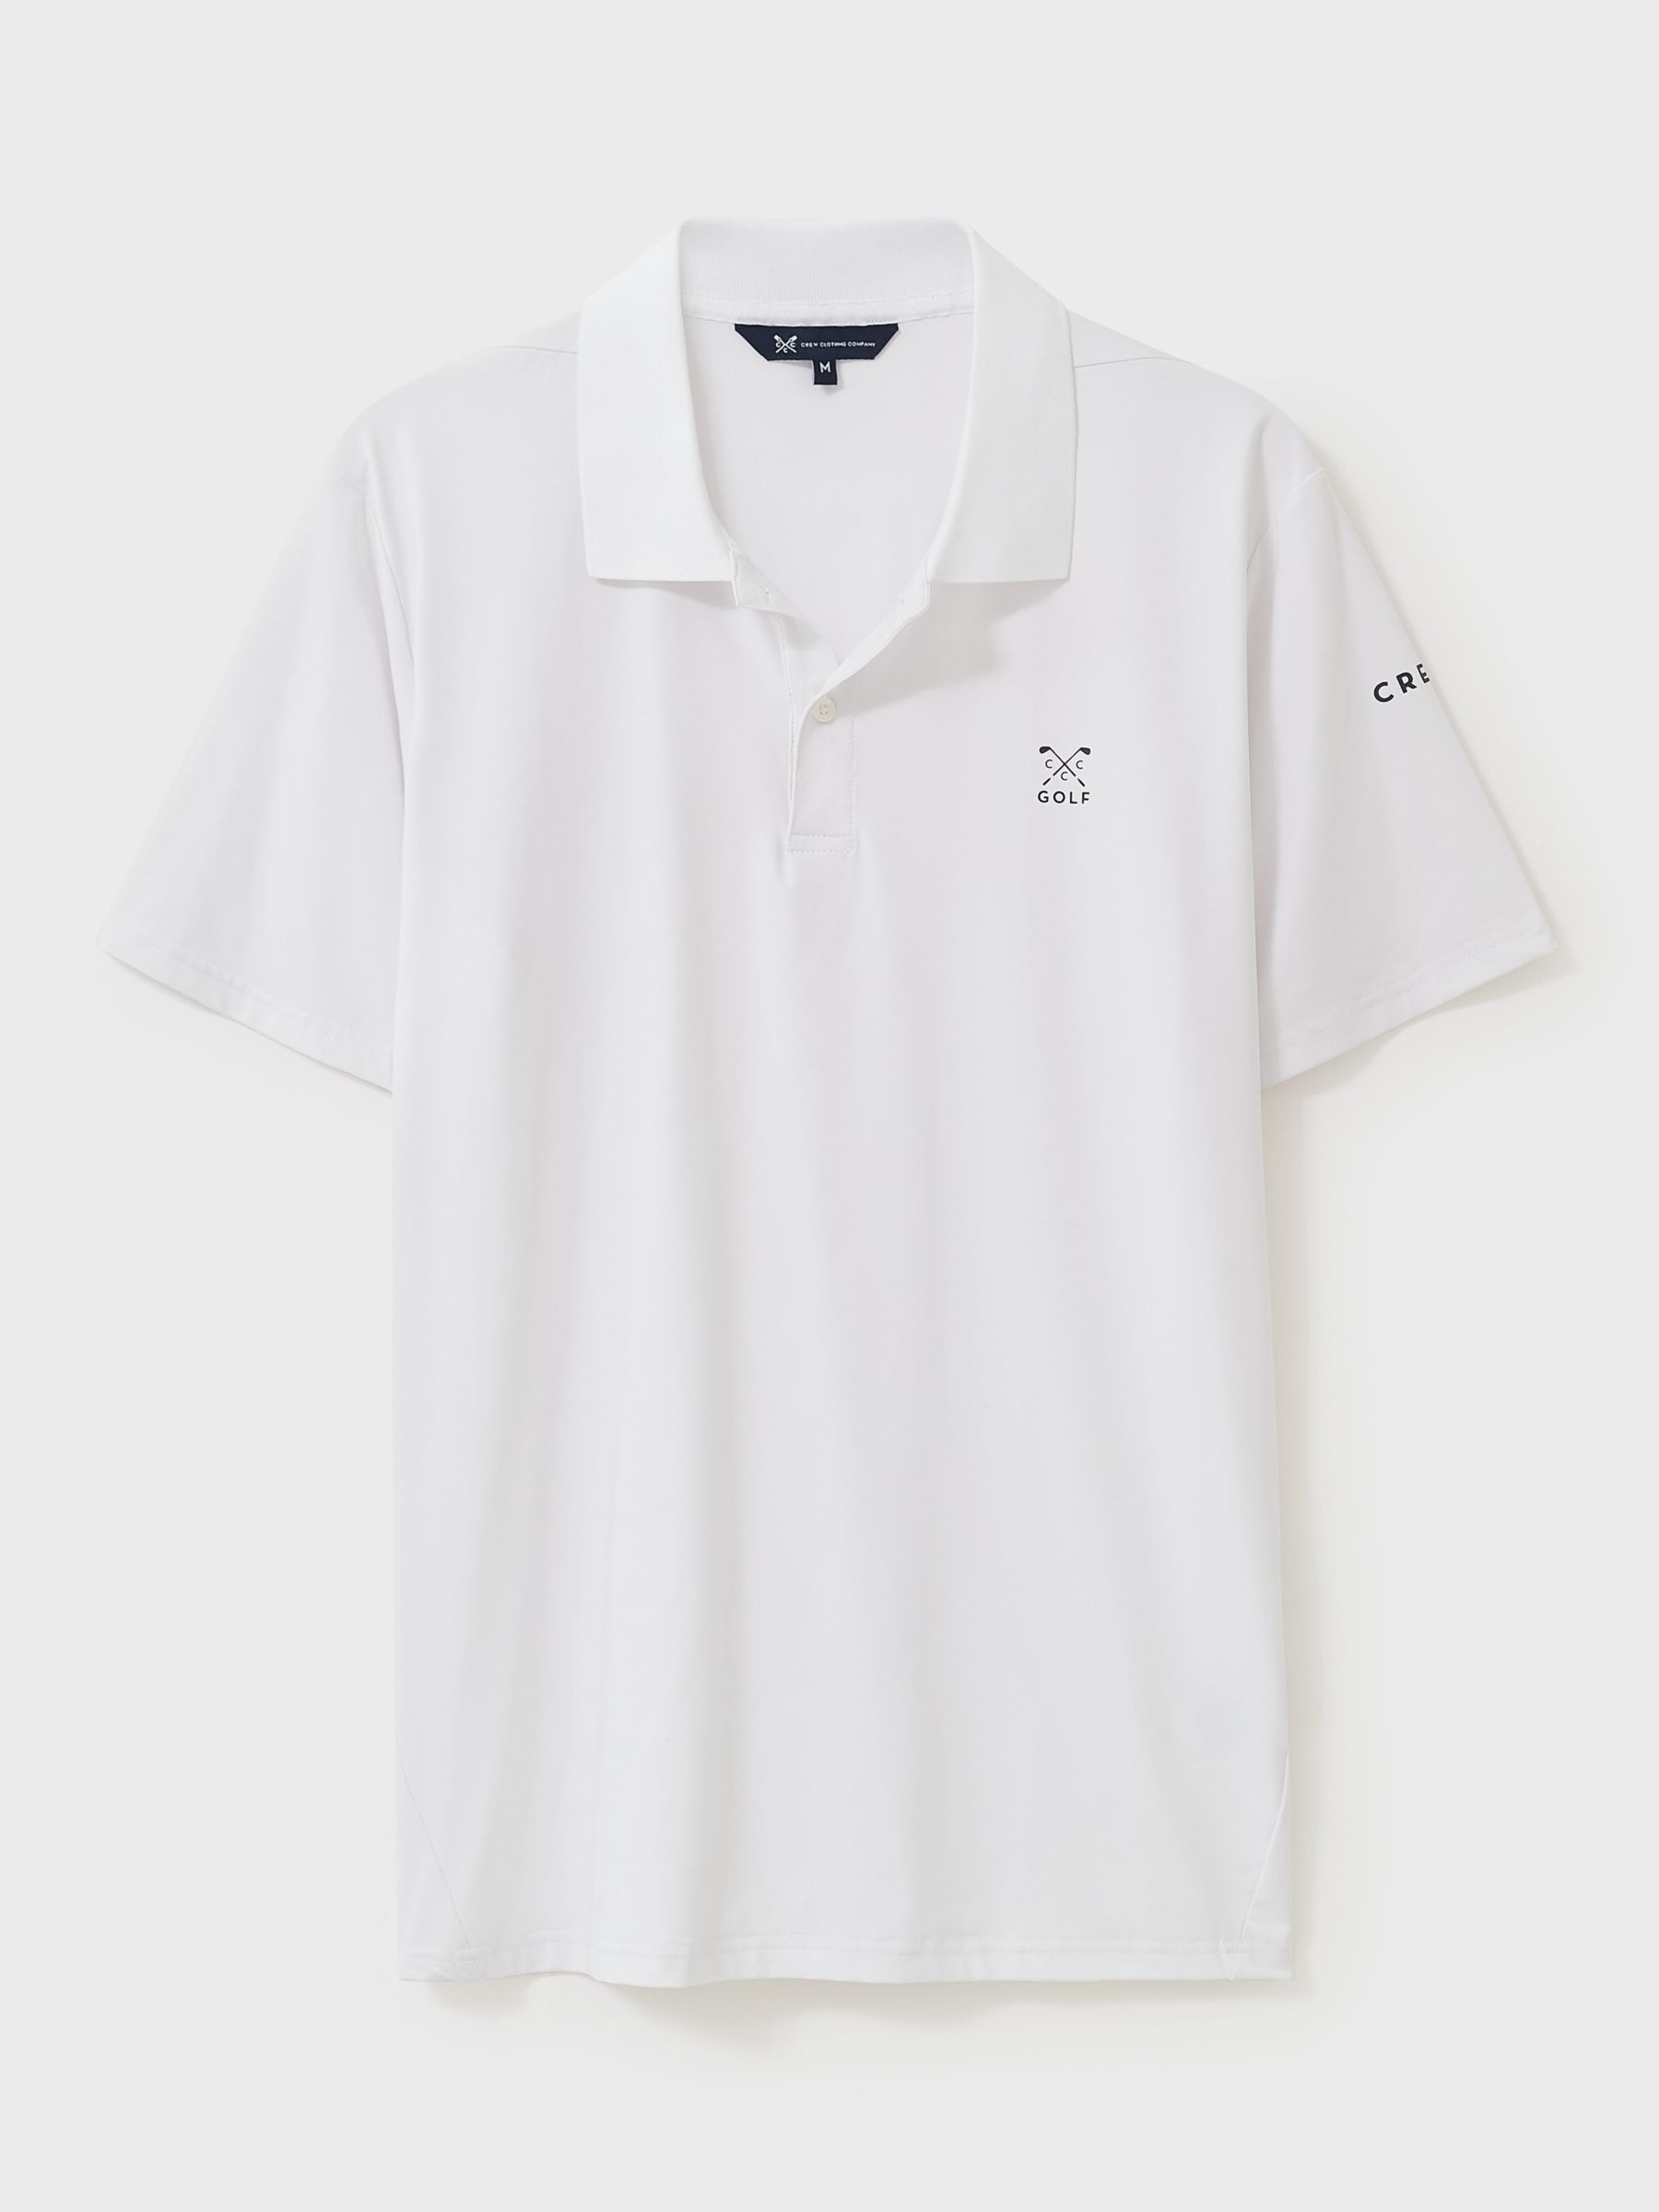 Crew Clothing Smart Stretch Golf Polo Shirt at John Lewis & Partners